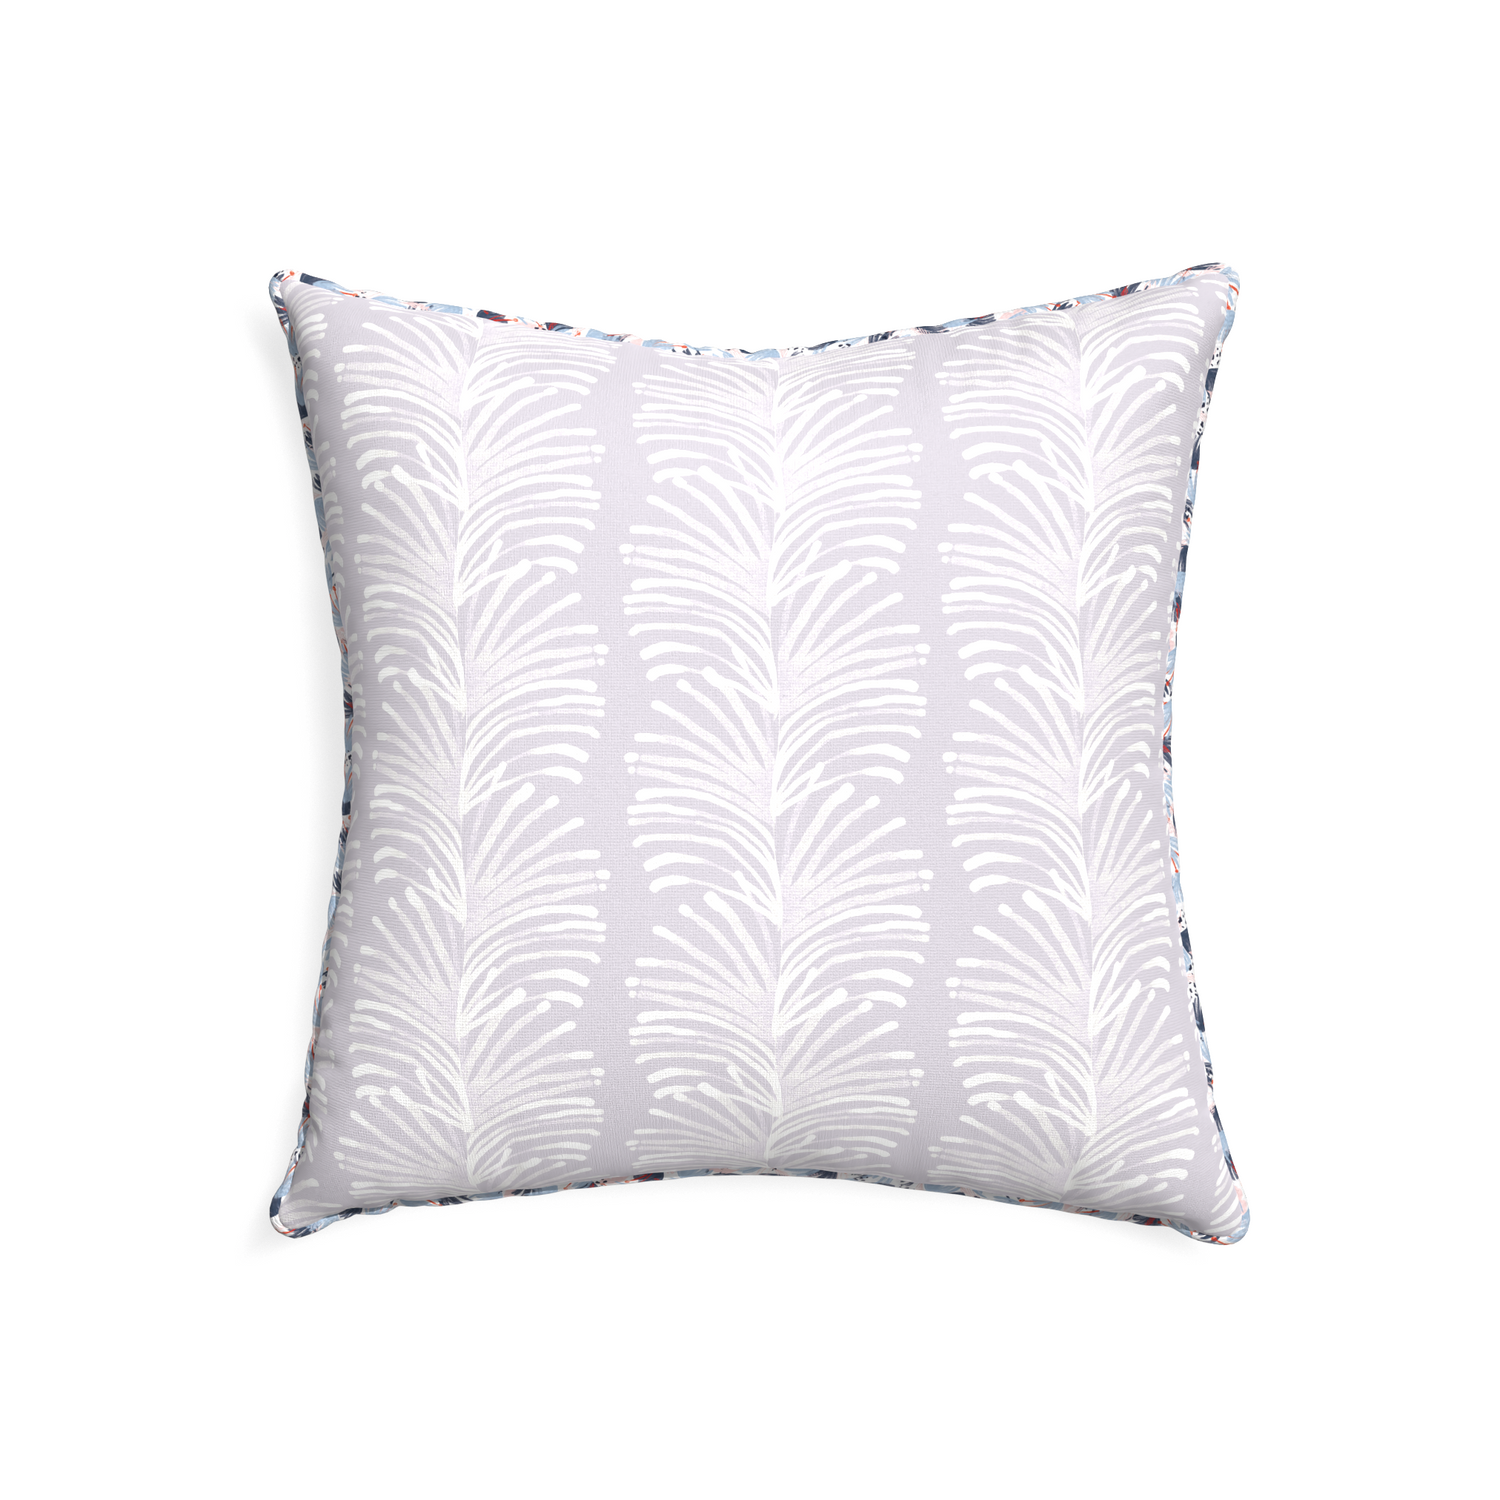 22-square emma lavender custom pillow with e piping on white background